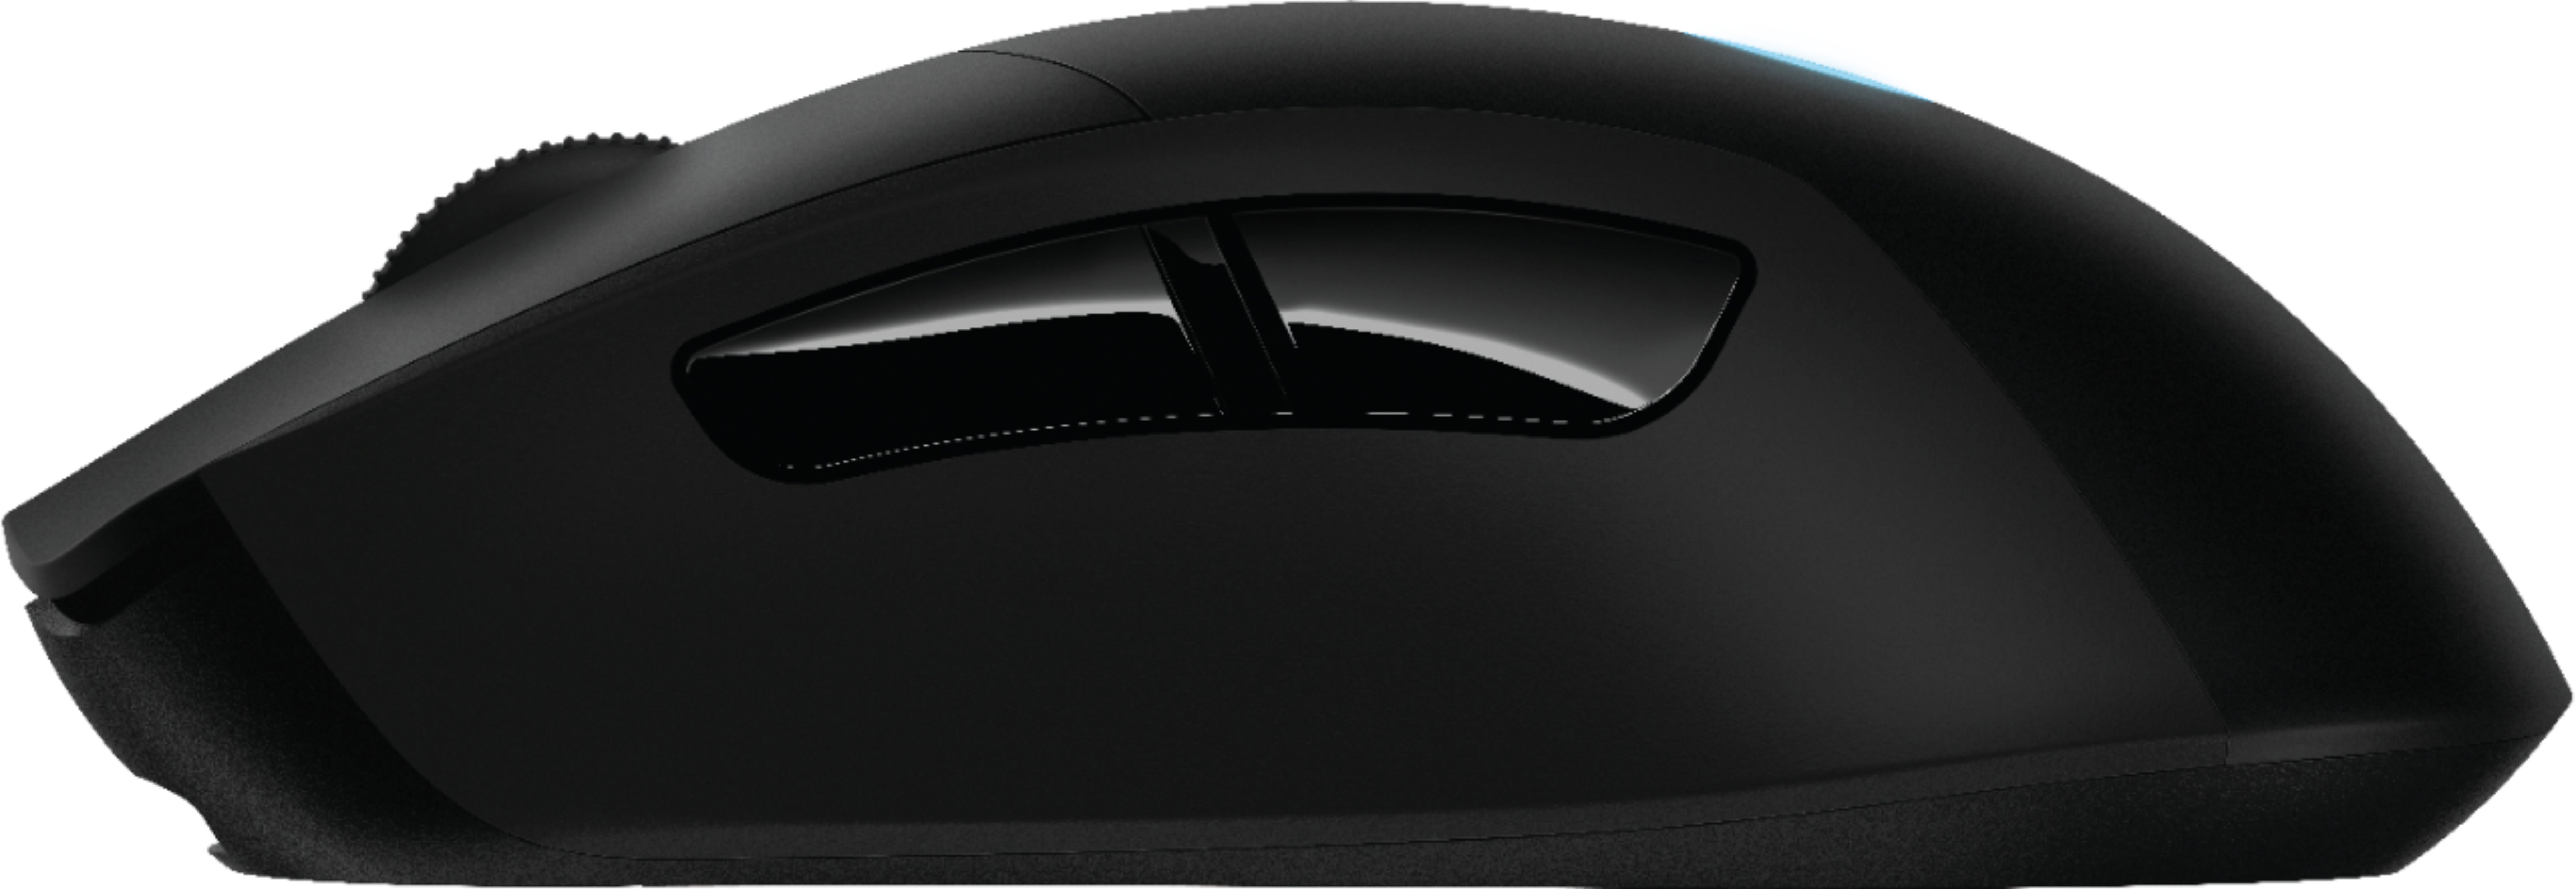 Customer Reviews Logitech G403 Hero Wired Optical Gaming Mouse Black 910 Best Buy